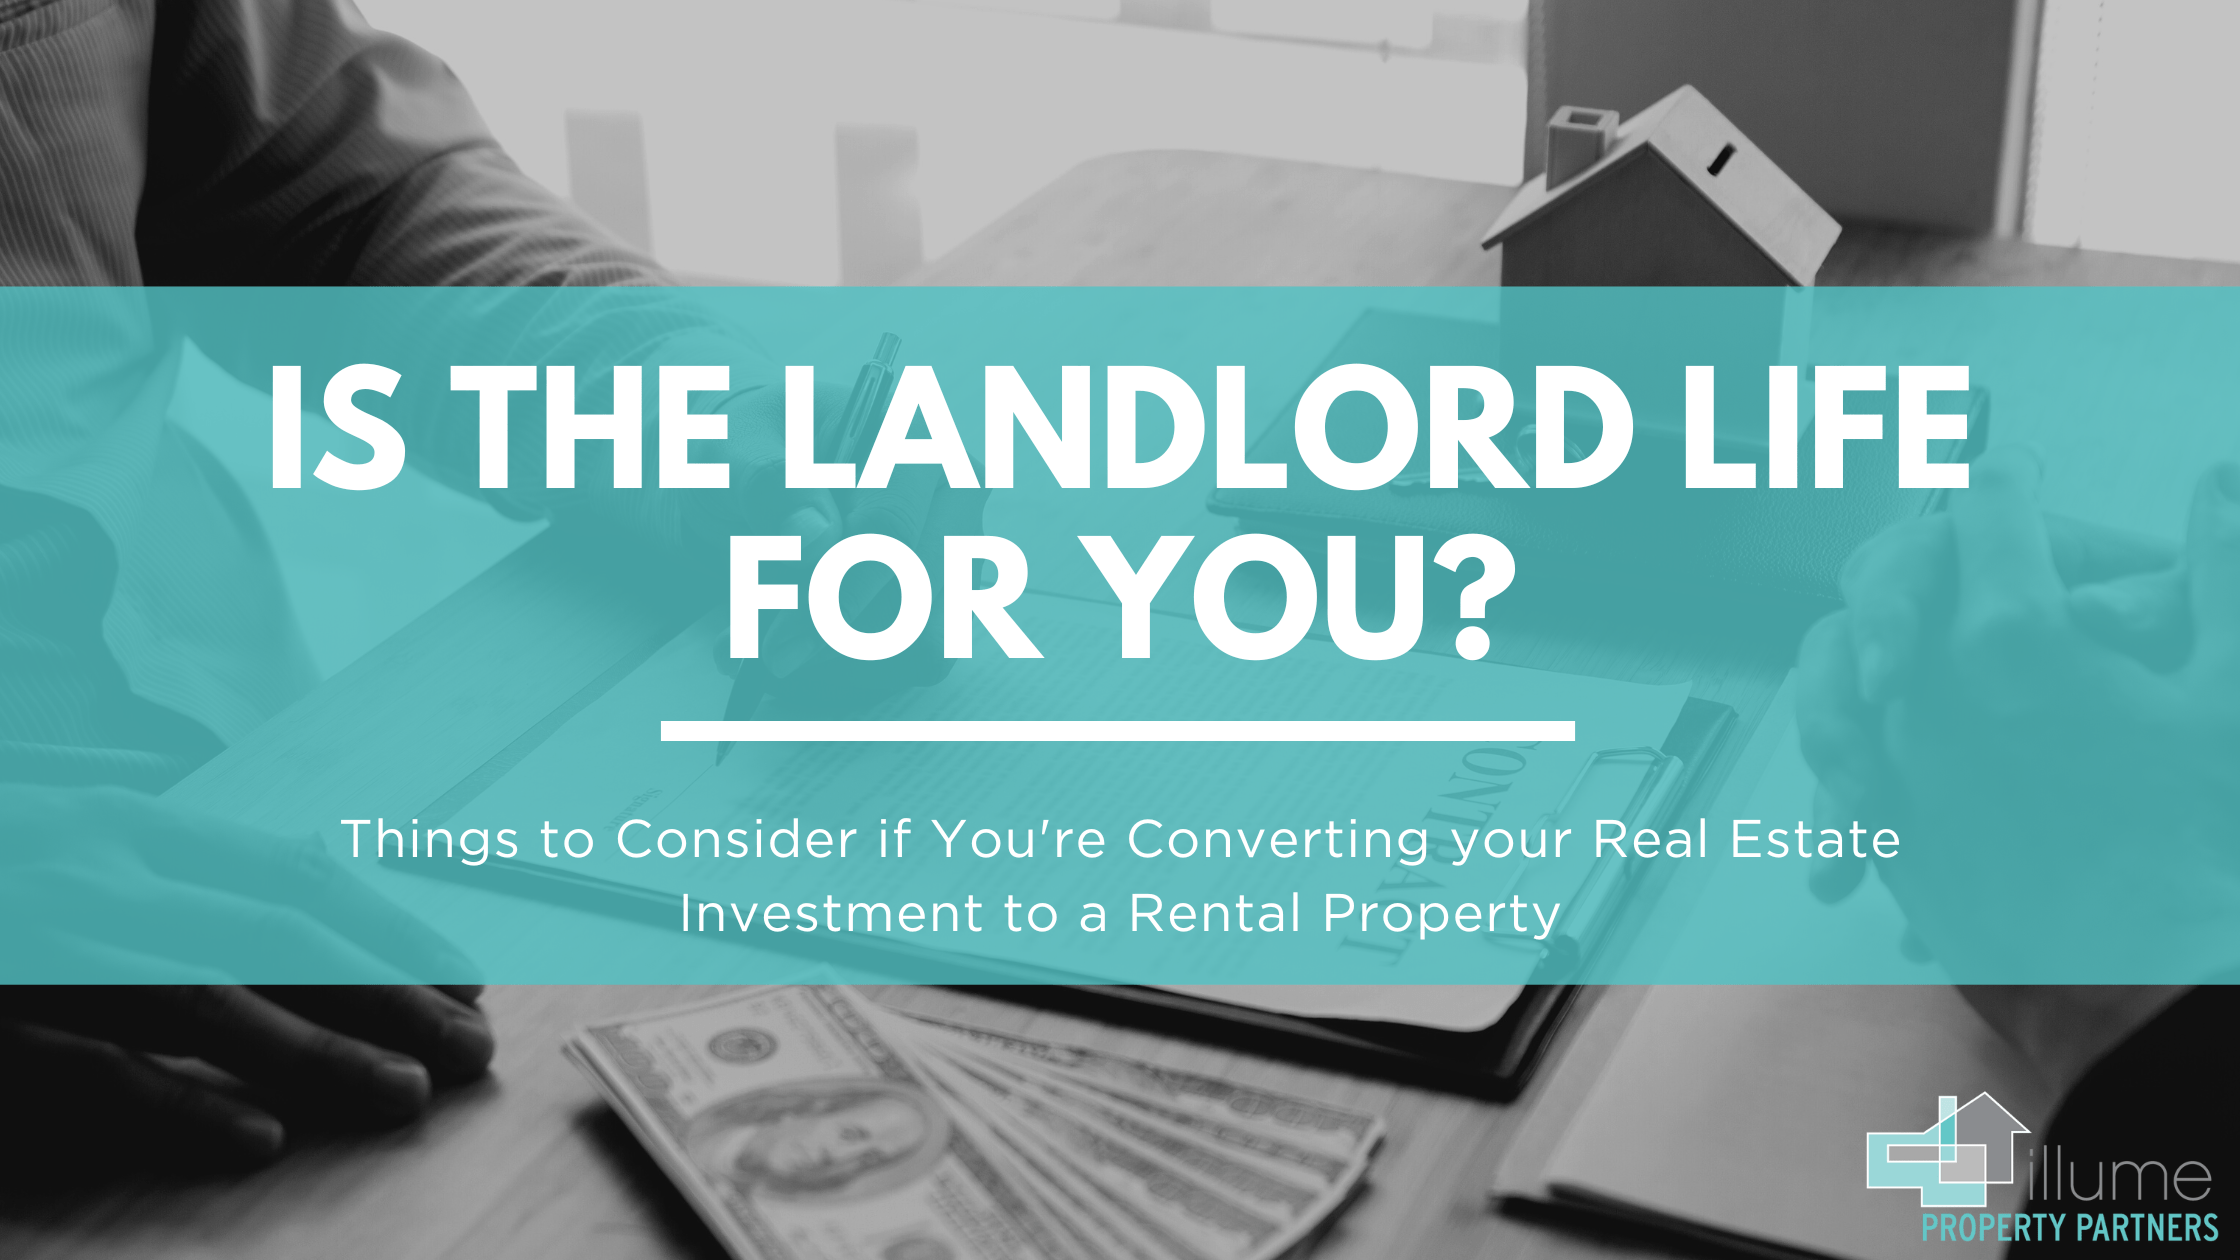 Is the Landlord Life for you?